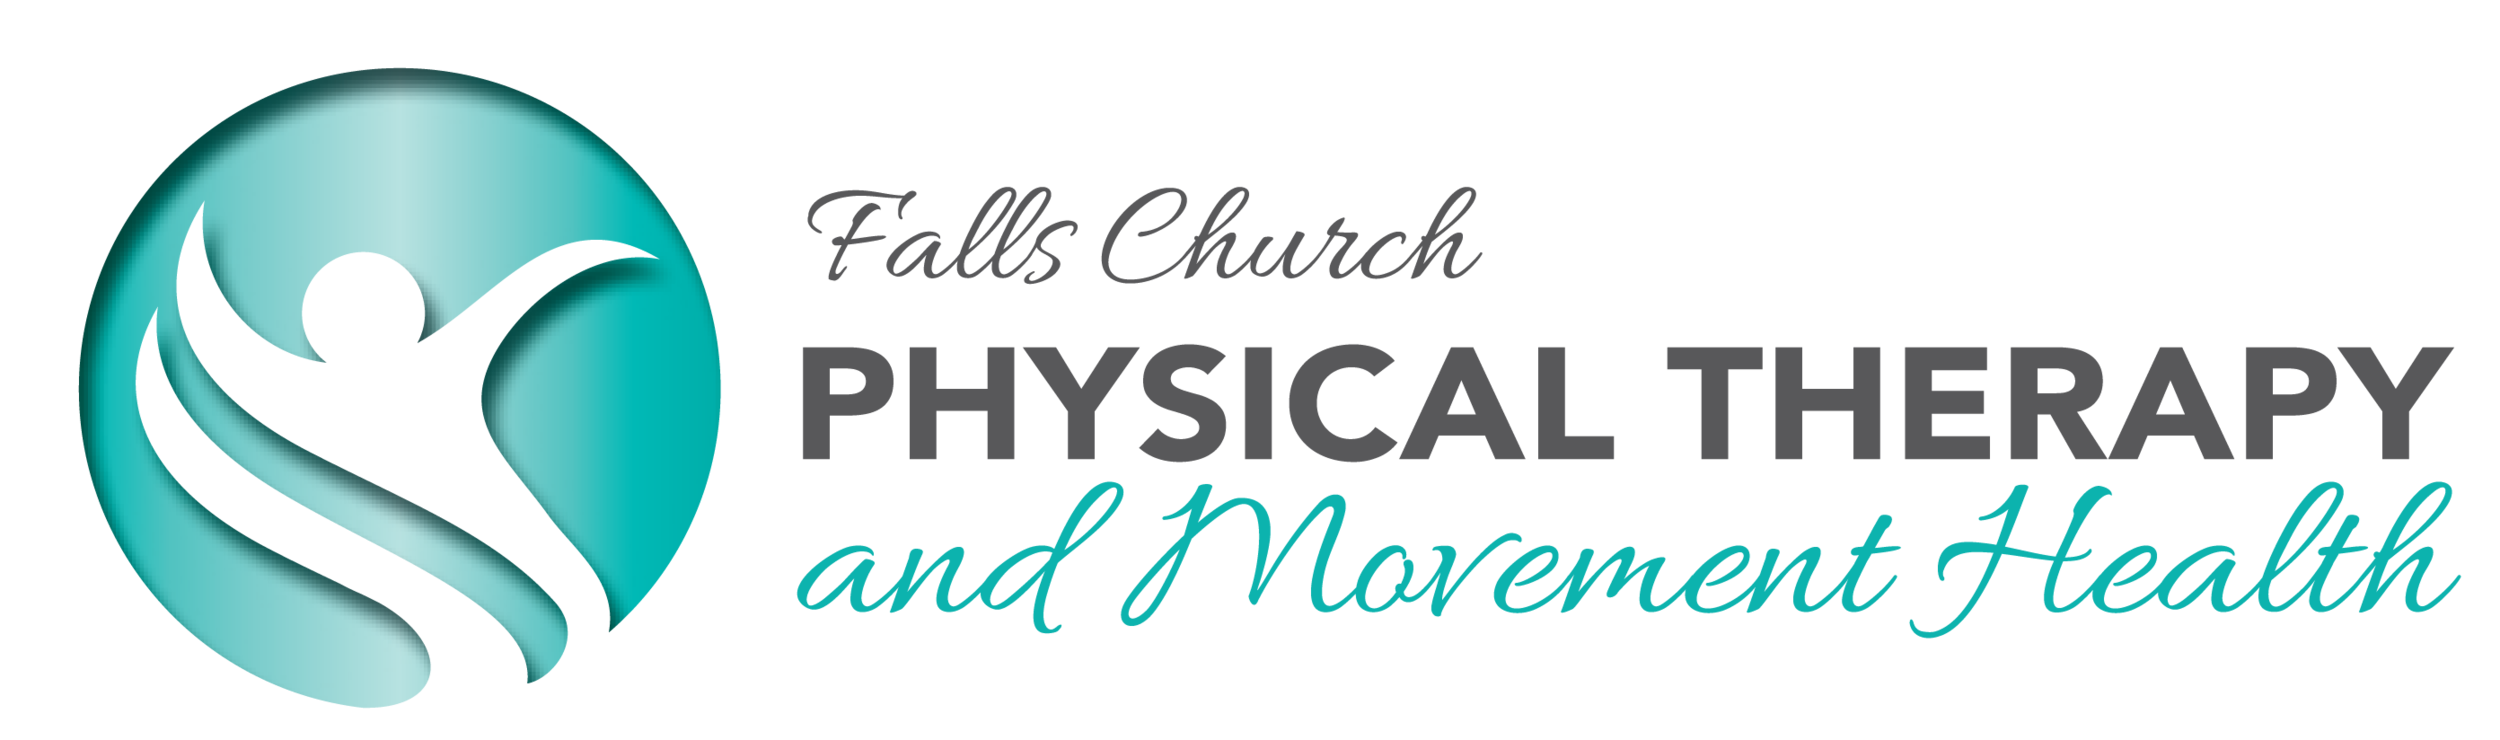 Falls Church Physical Therapy and Movement Health